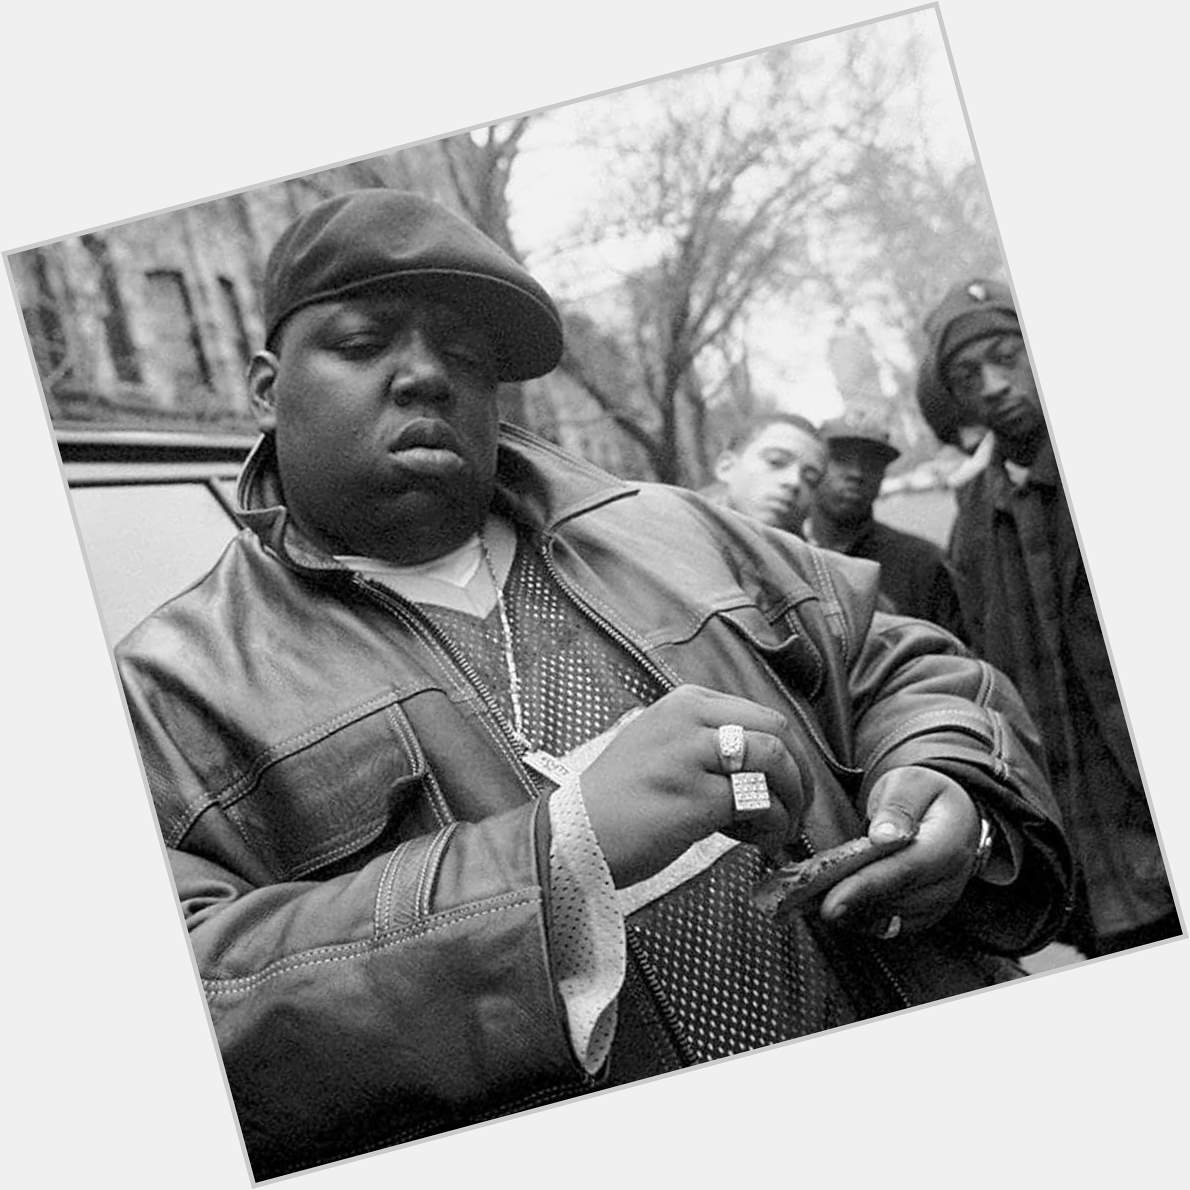 Christopher George Latore Wallace (The Notorious B.I.G), I\d be turning 48 this day.
Happy Birthday. 